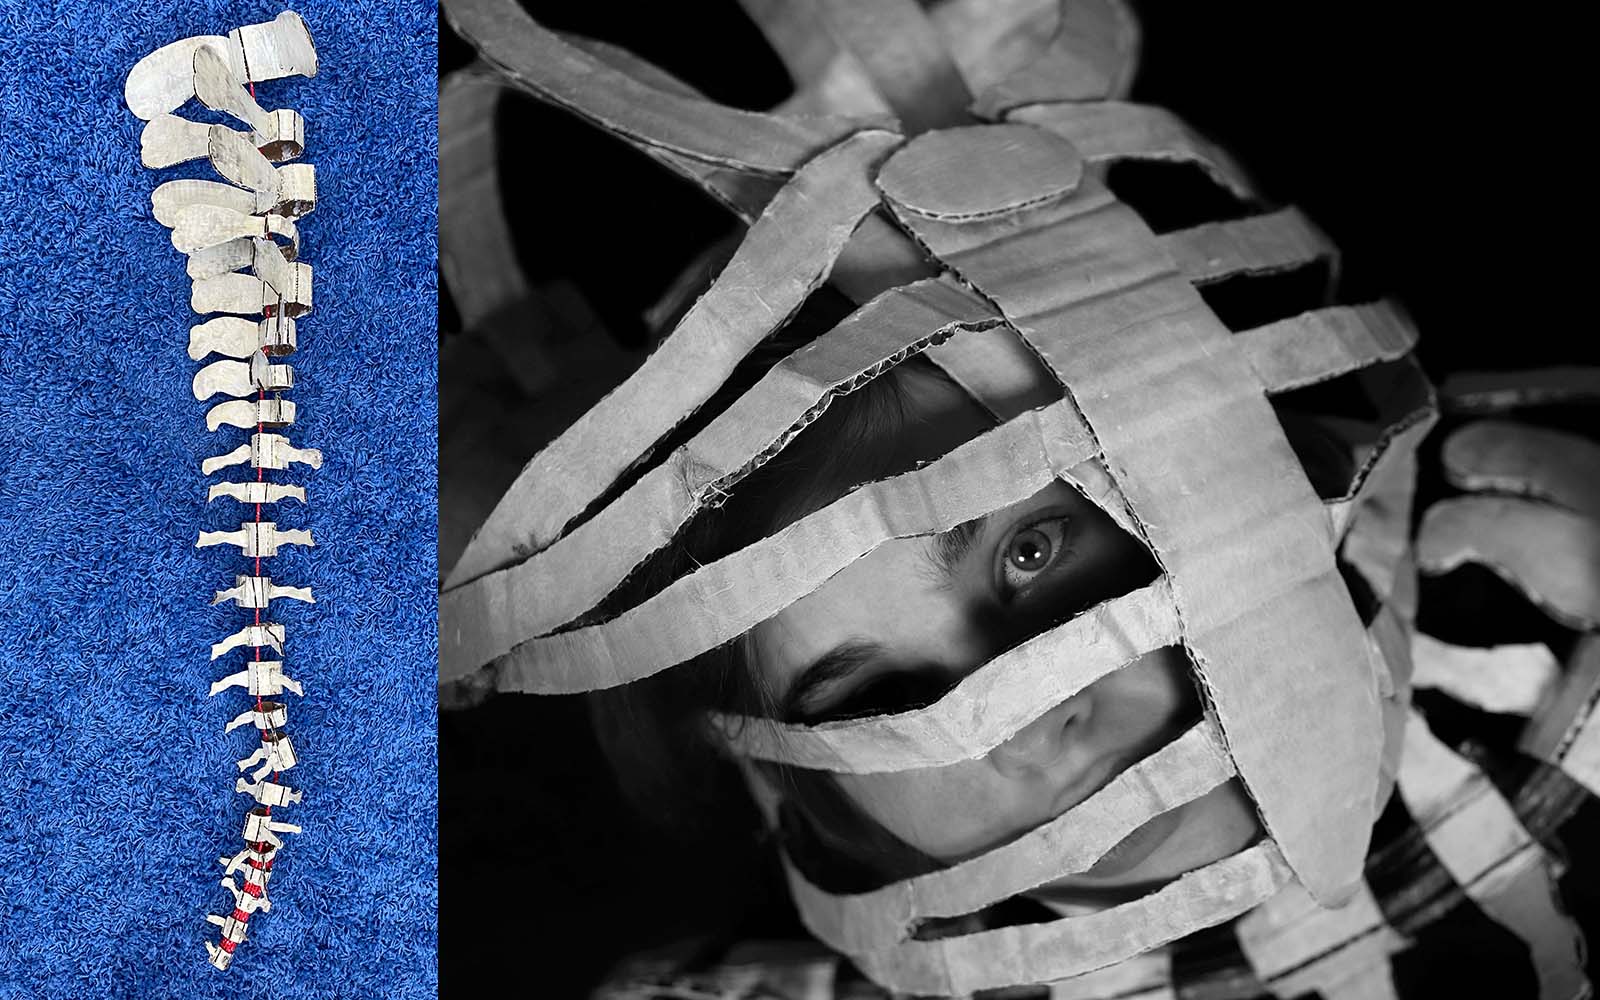 Photograph of a spinal column made of cardboard next to a photo of a face looking through cardboard ribs.